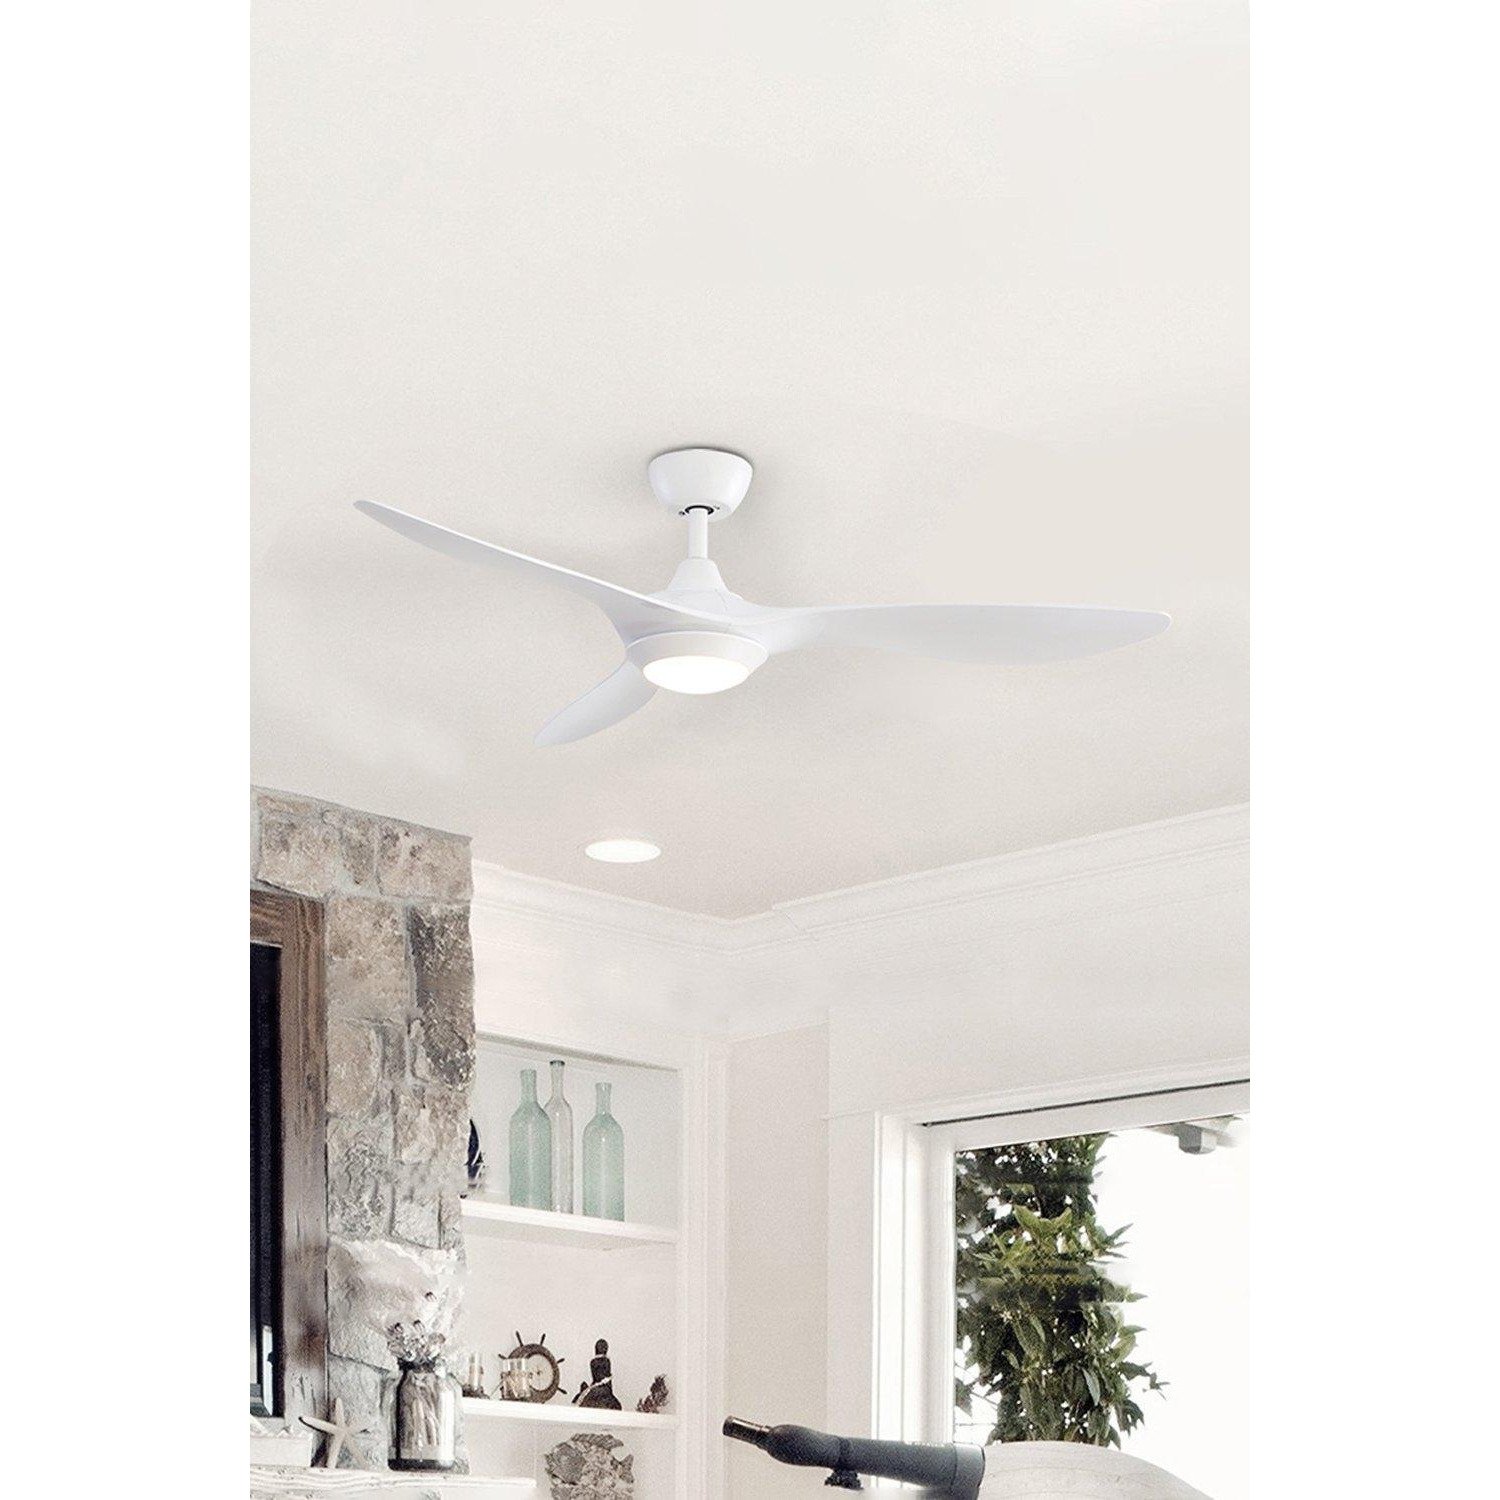 52 Inch Ceiling Fan Light Fixture with Remote Control for Living Room - image 1